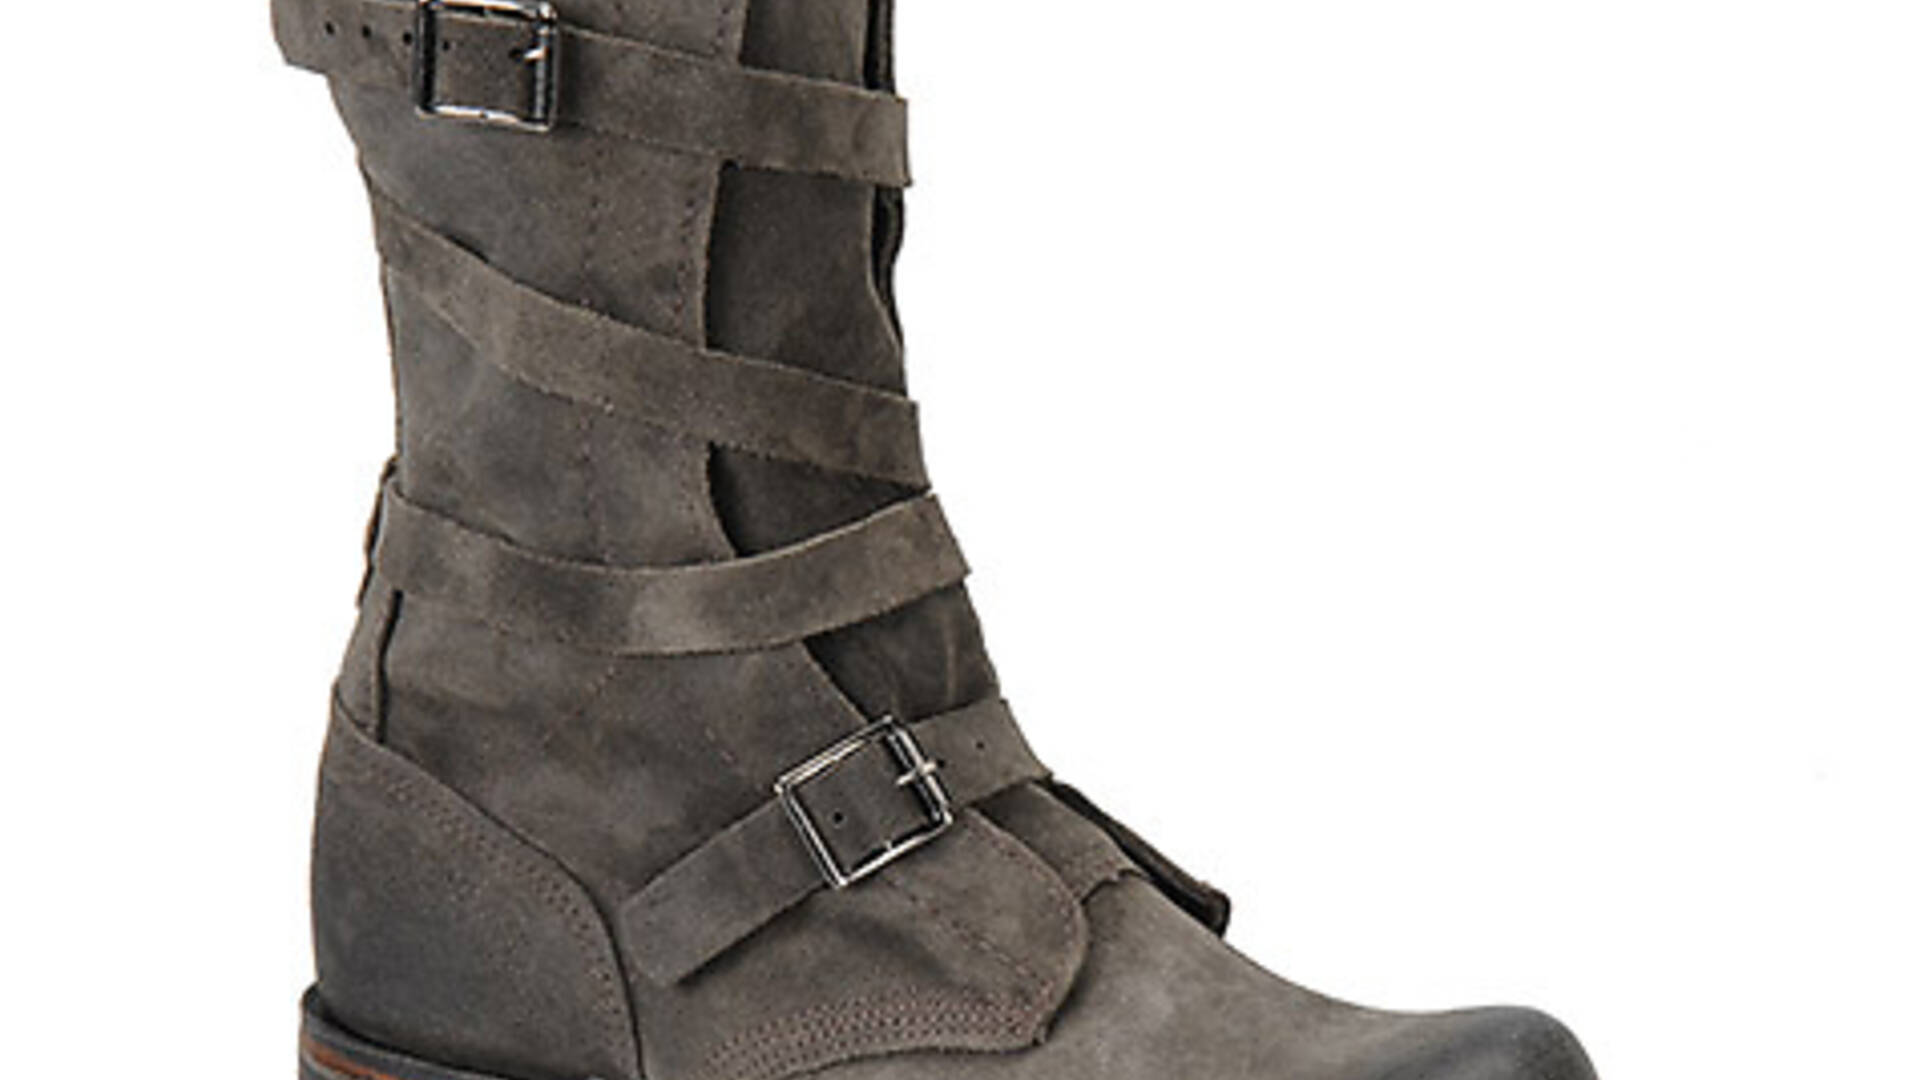 The best shoes for women to buy for fall 2012